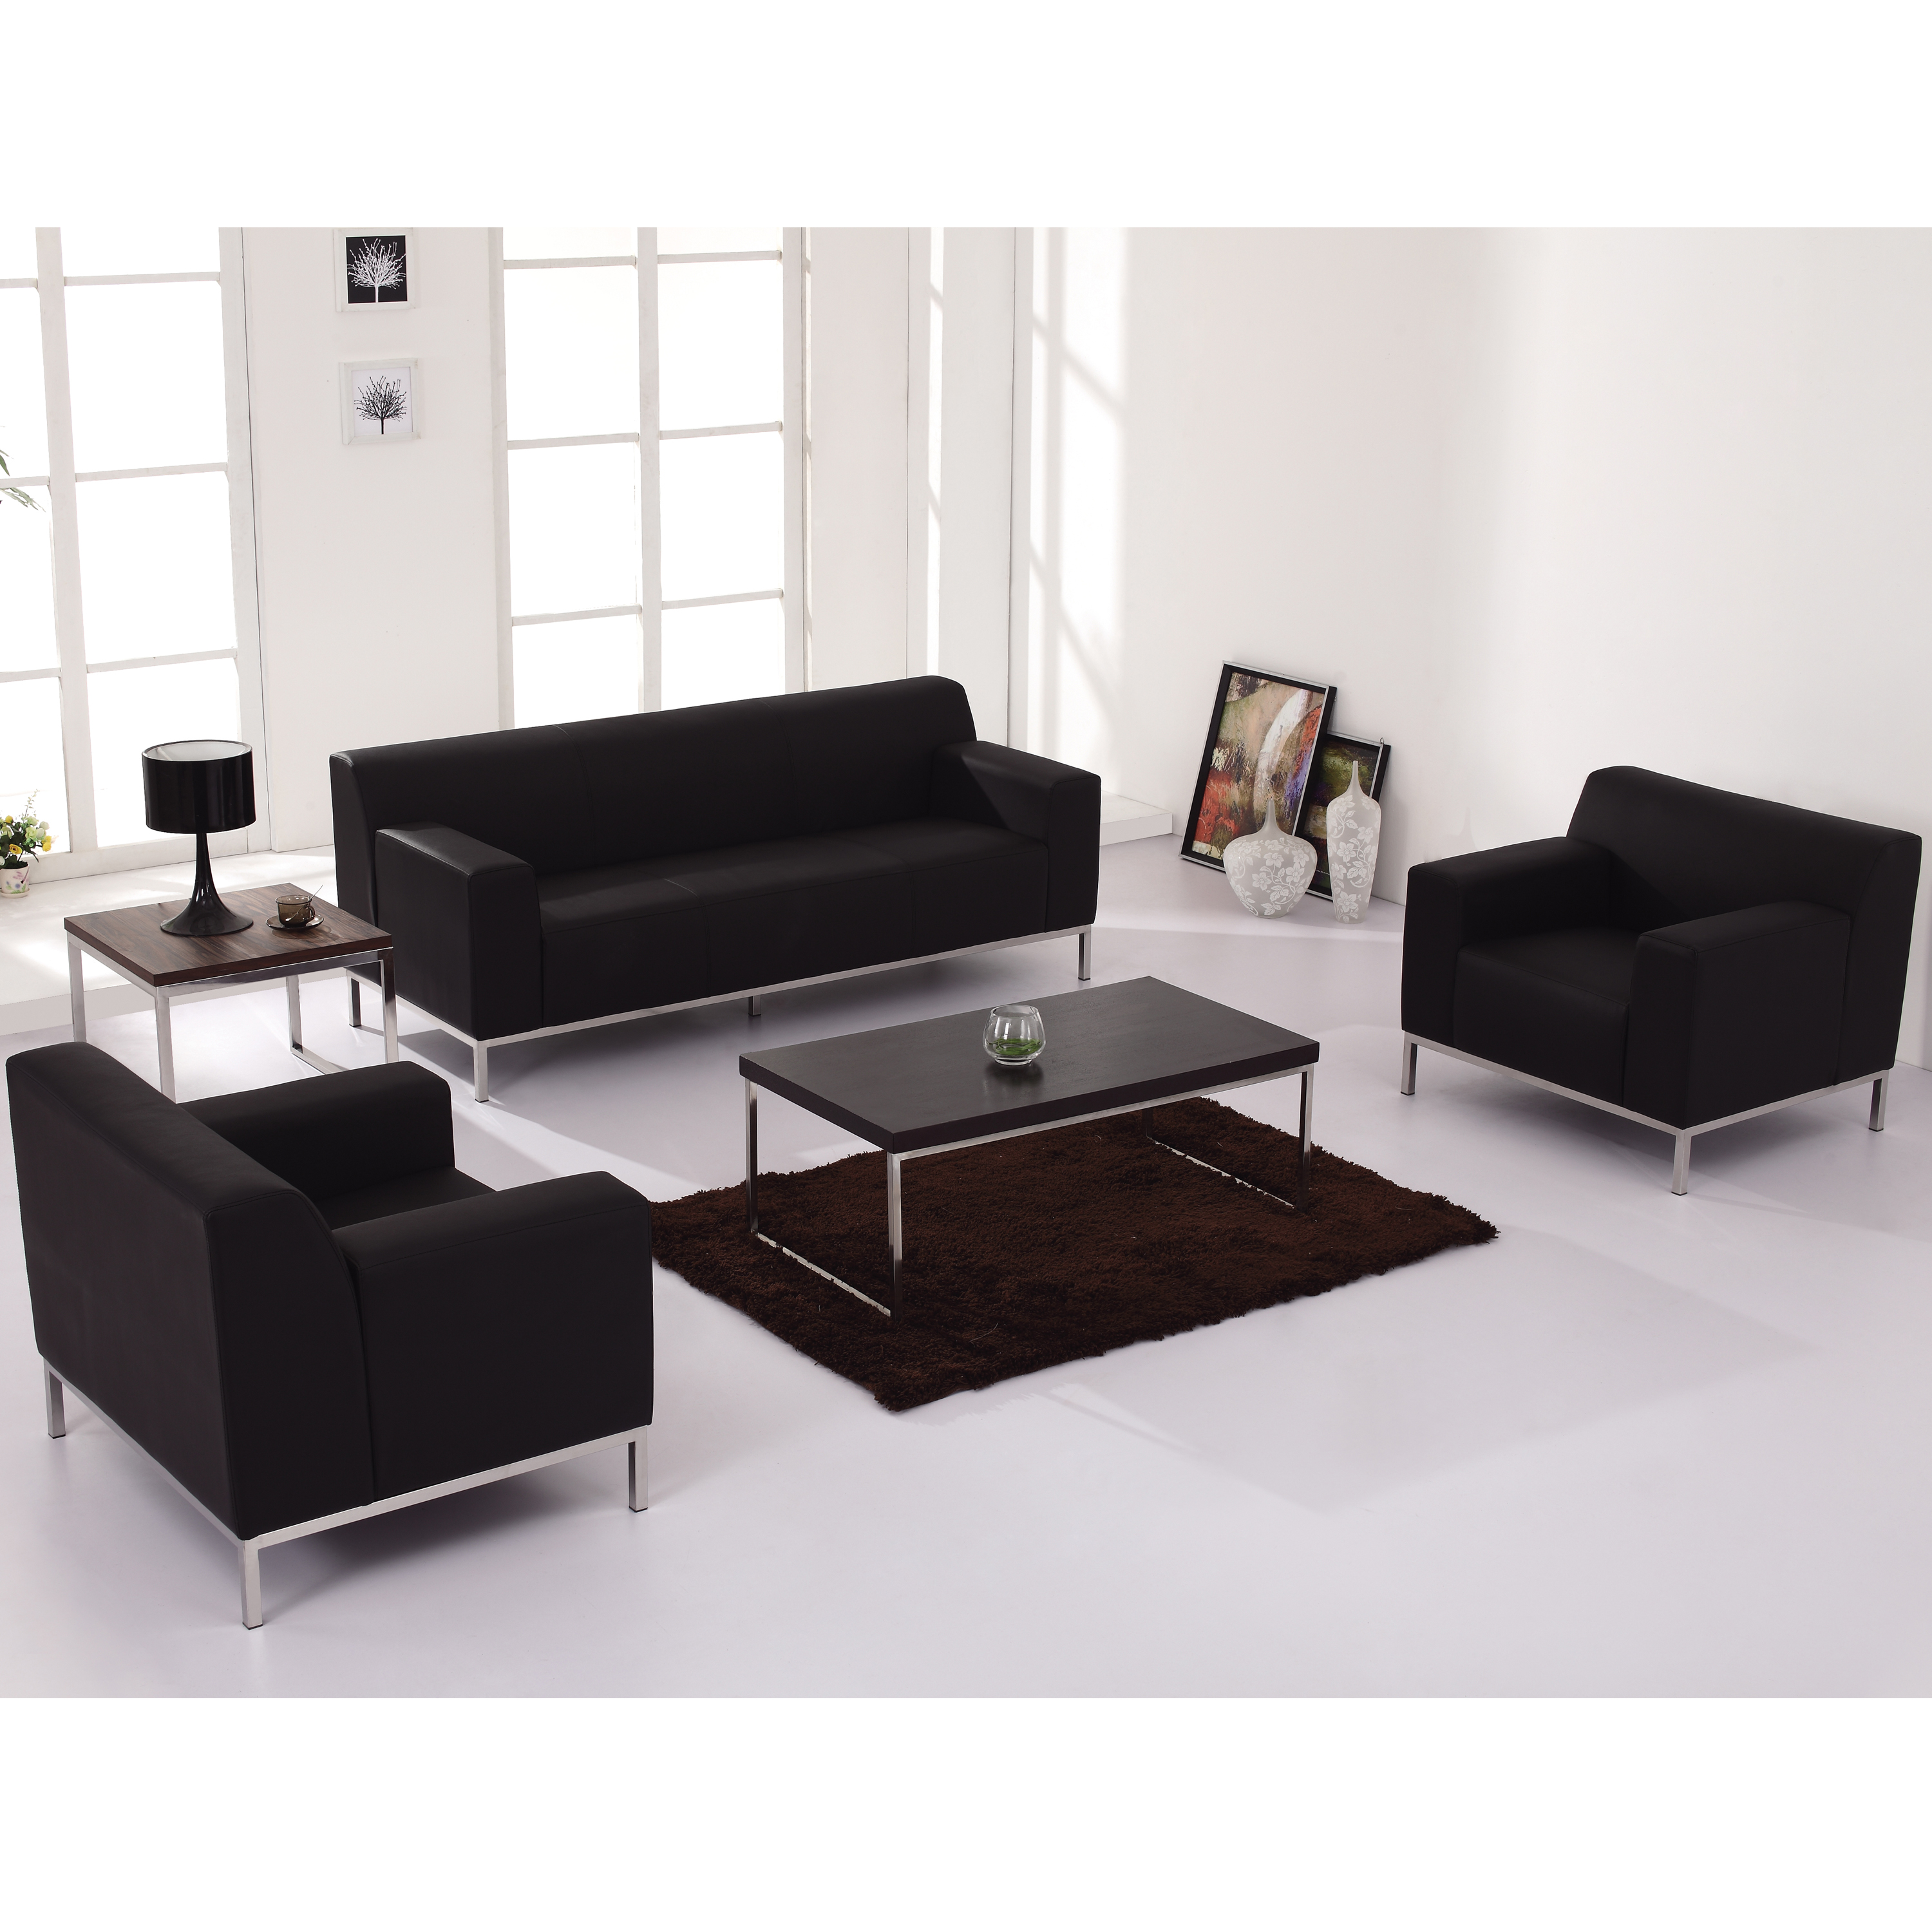 Flash Furniture HERCULES Definity Series Contemporary Black LeatherSoft Loveseat - image 2 of 5